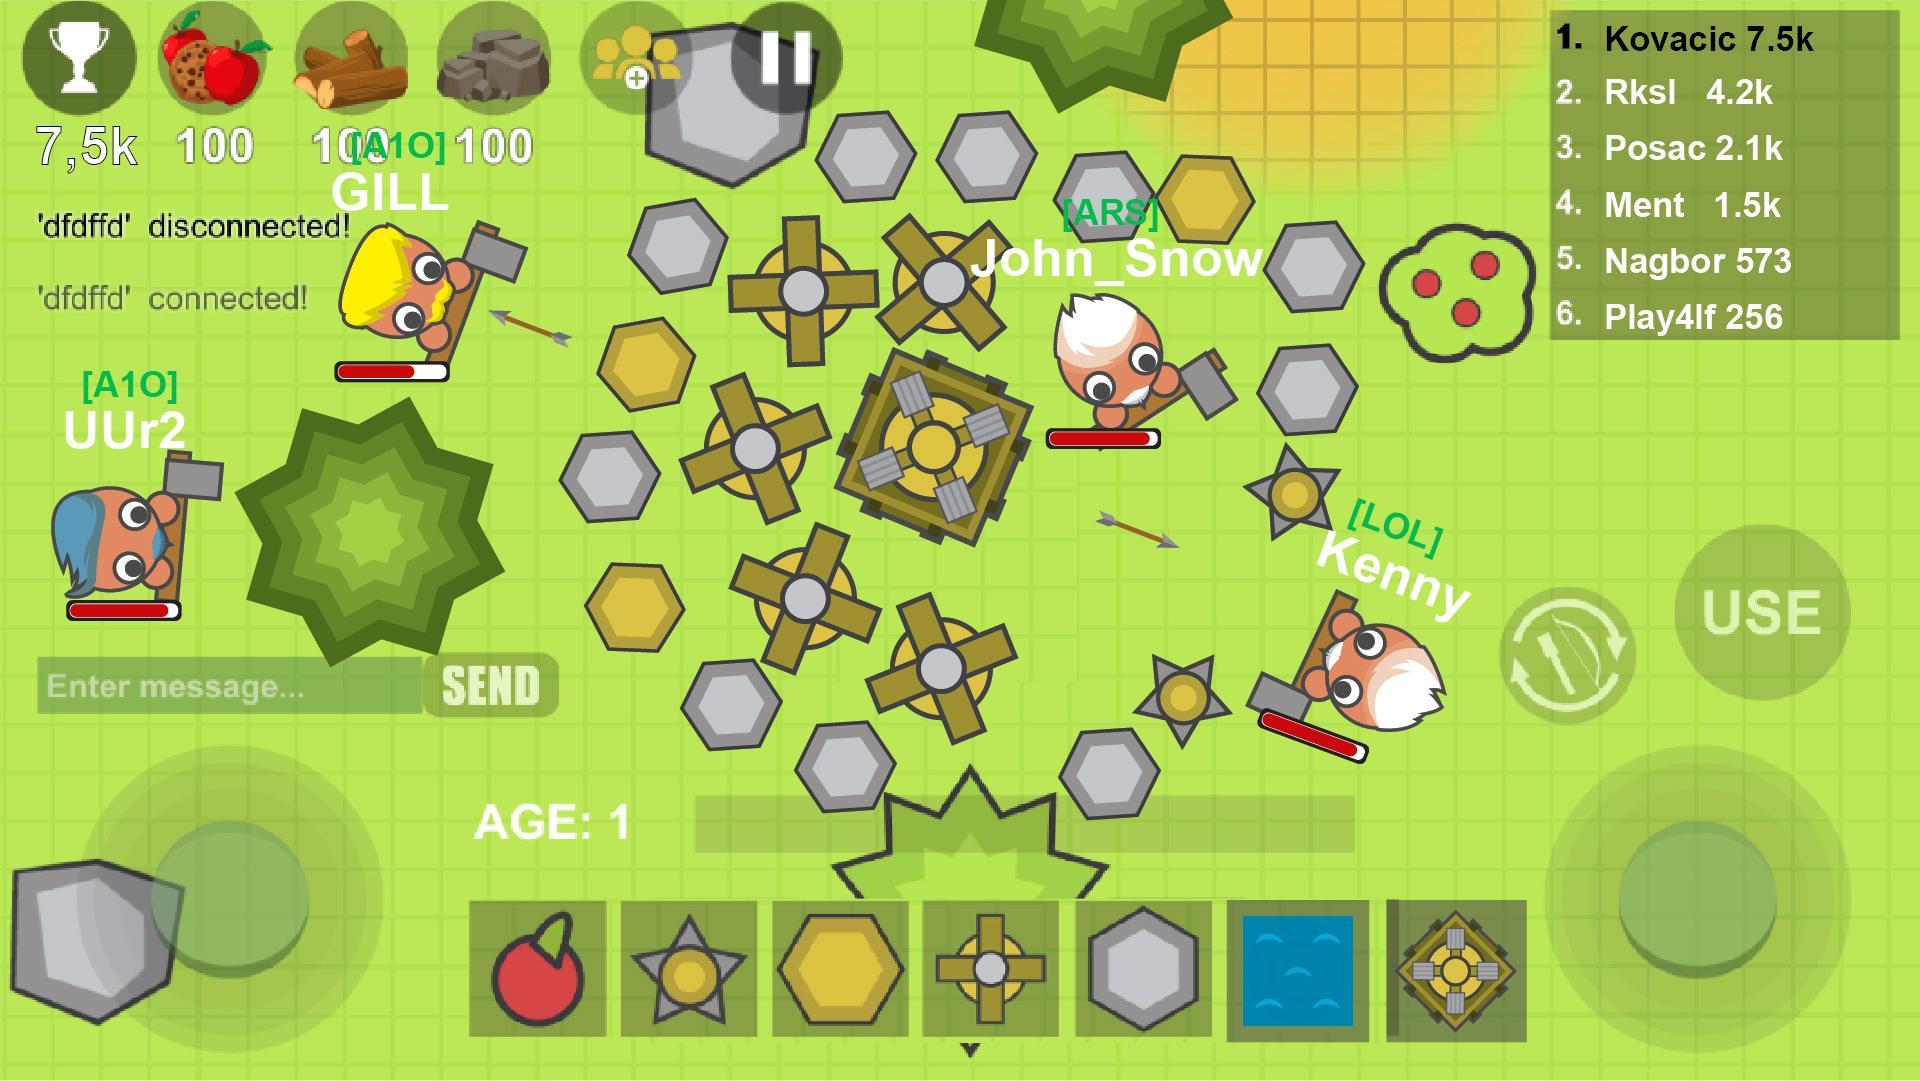 MooMoo.io (Official) APK for Android Download